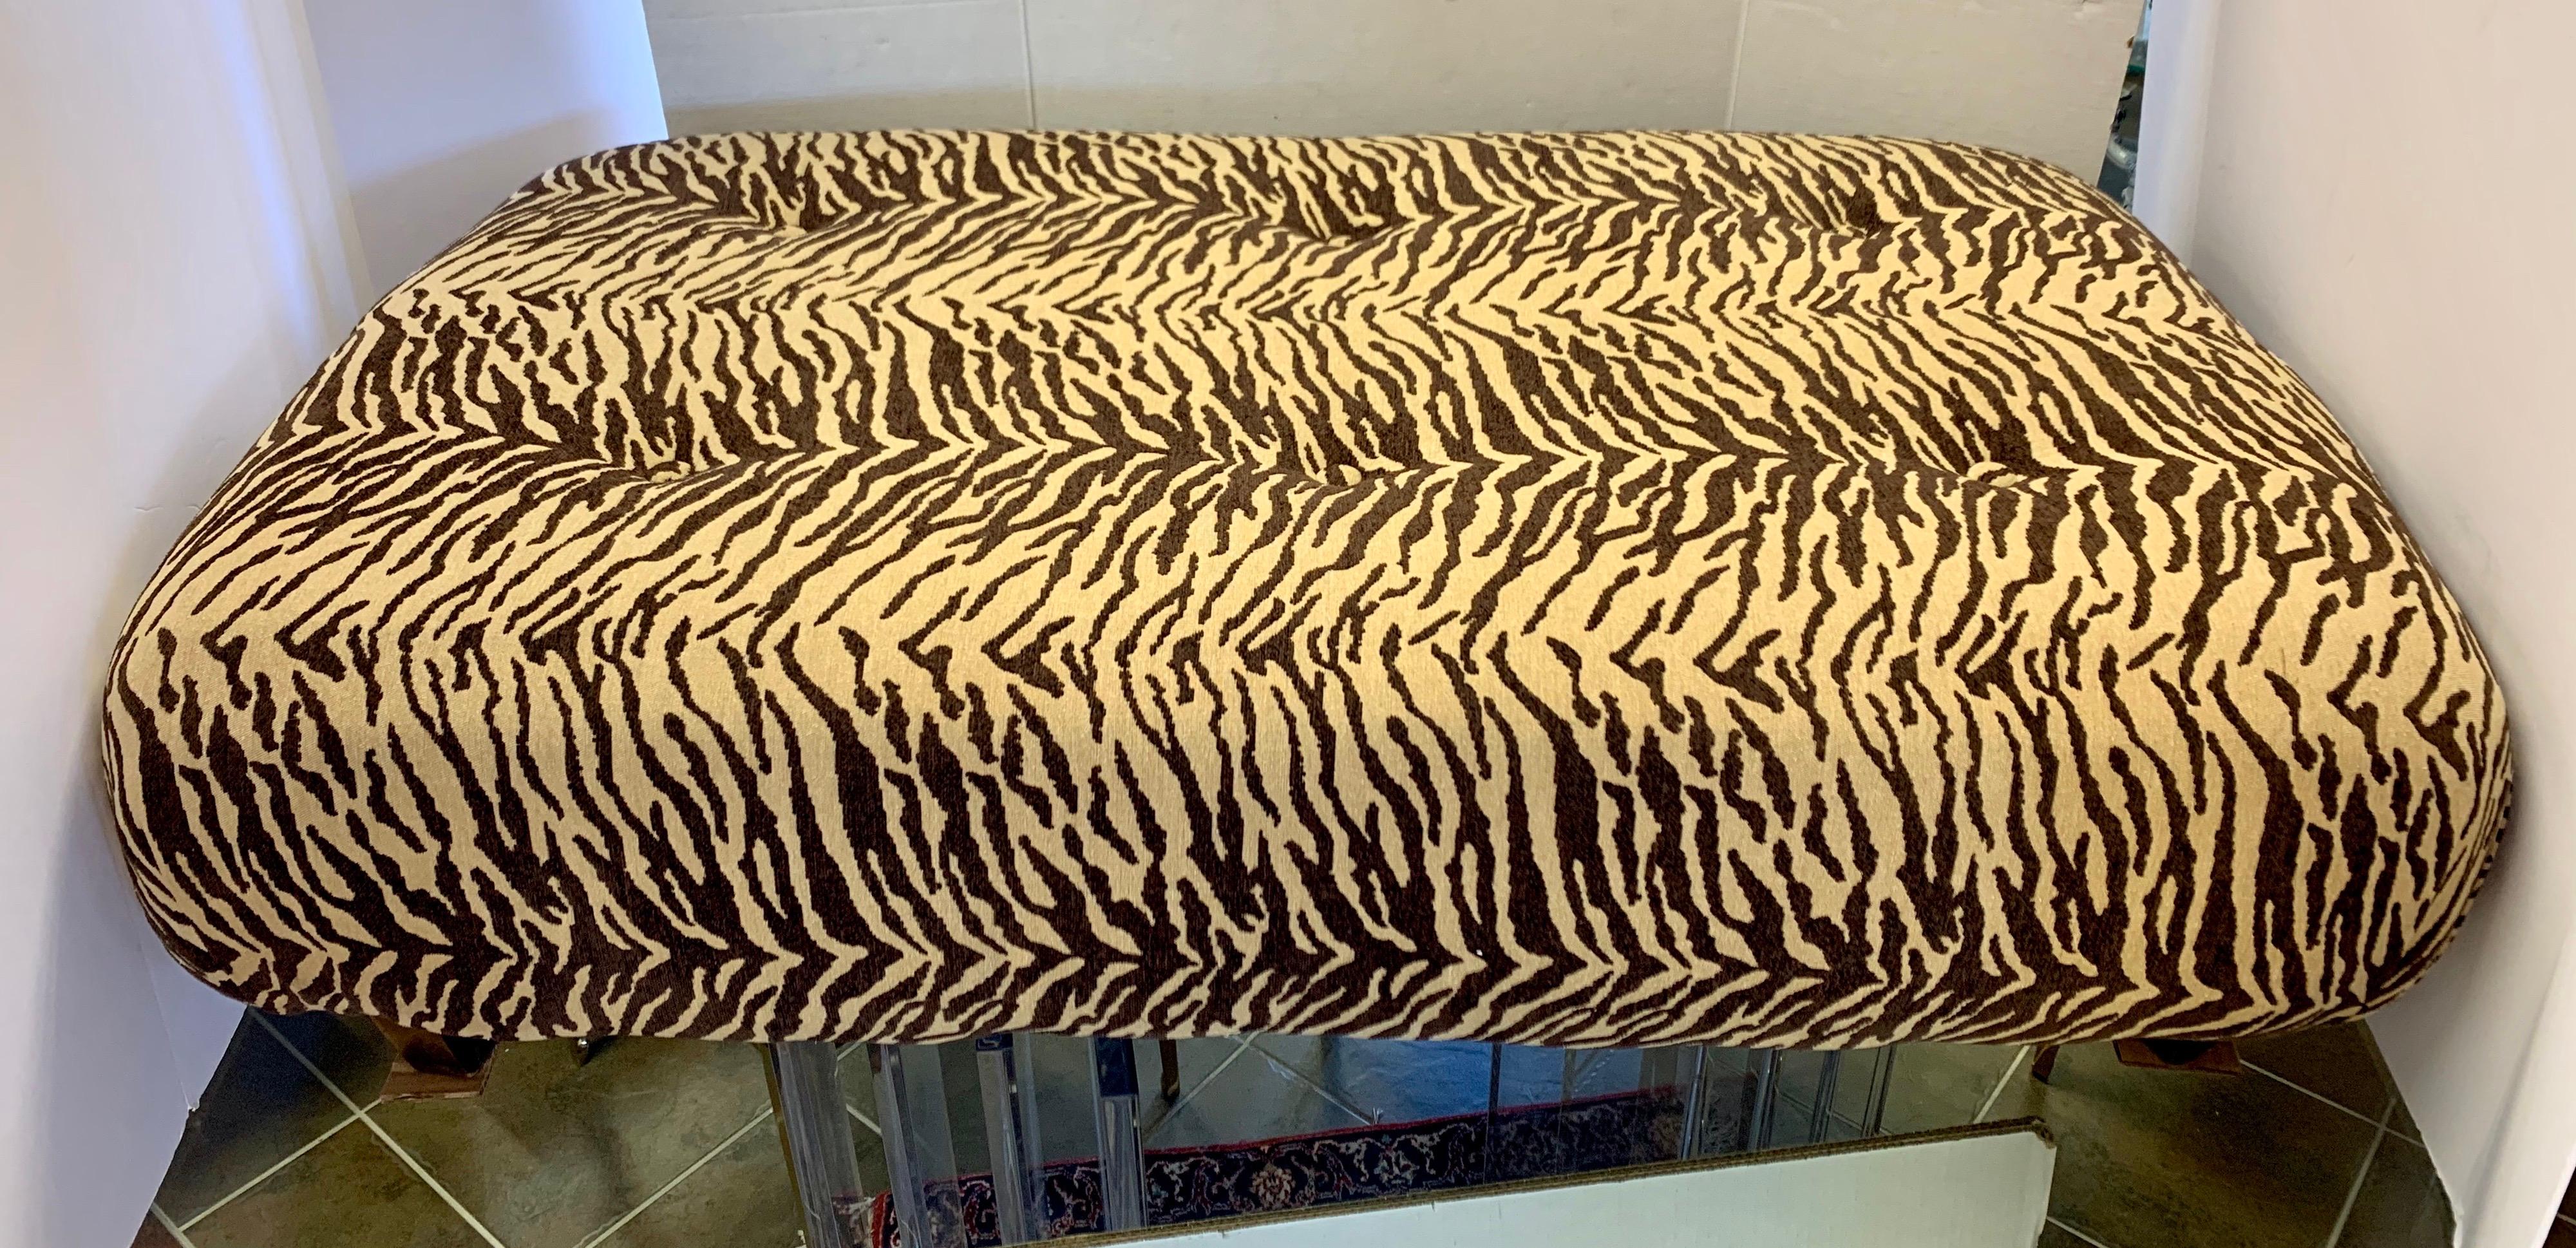 Vintage extra large ottoman newly upholstered in an elegant brown and tan zebra print. Great lines and
better color scheme. All dimensions are below and the piece is in mint condition.